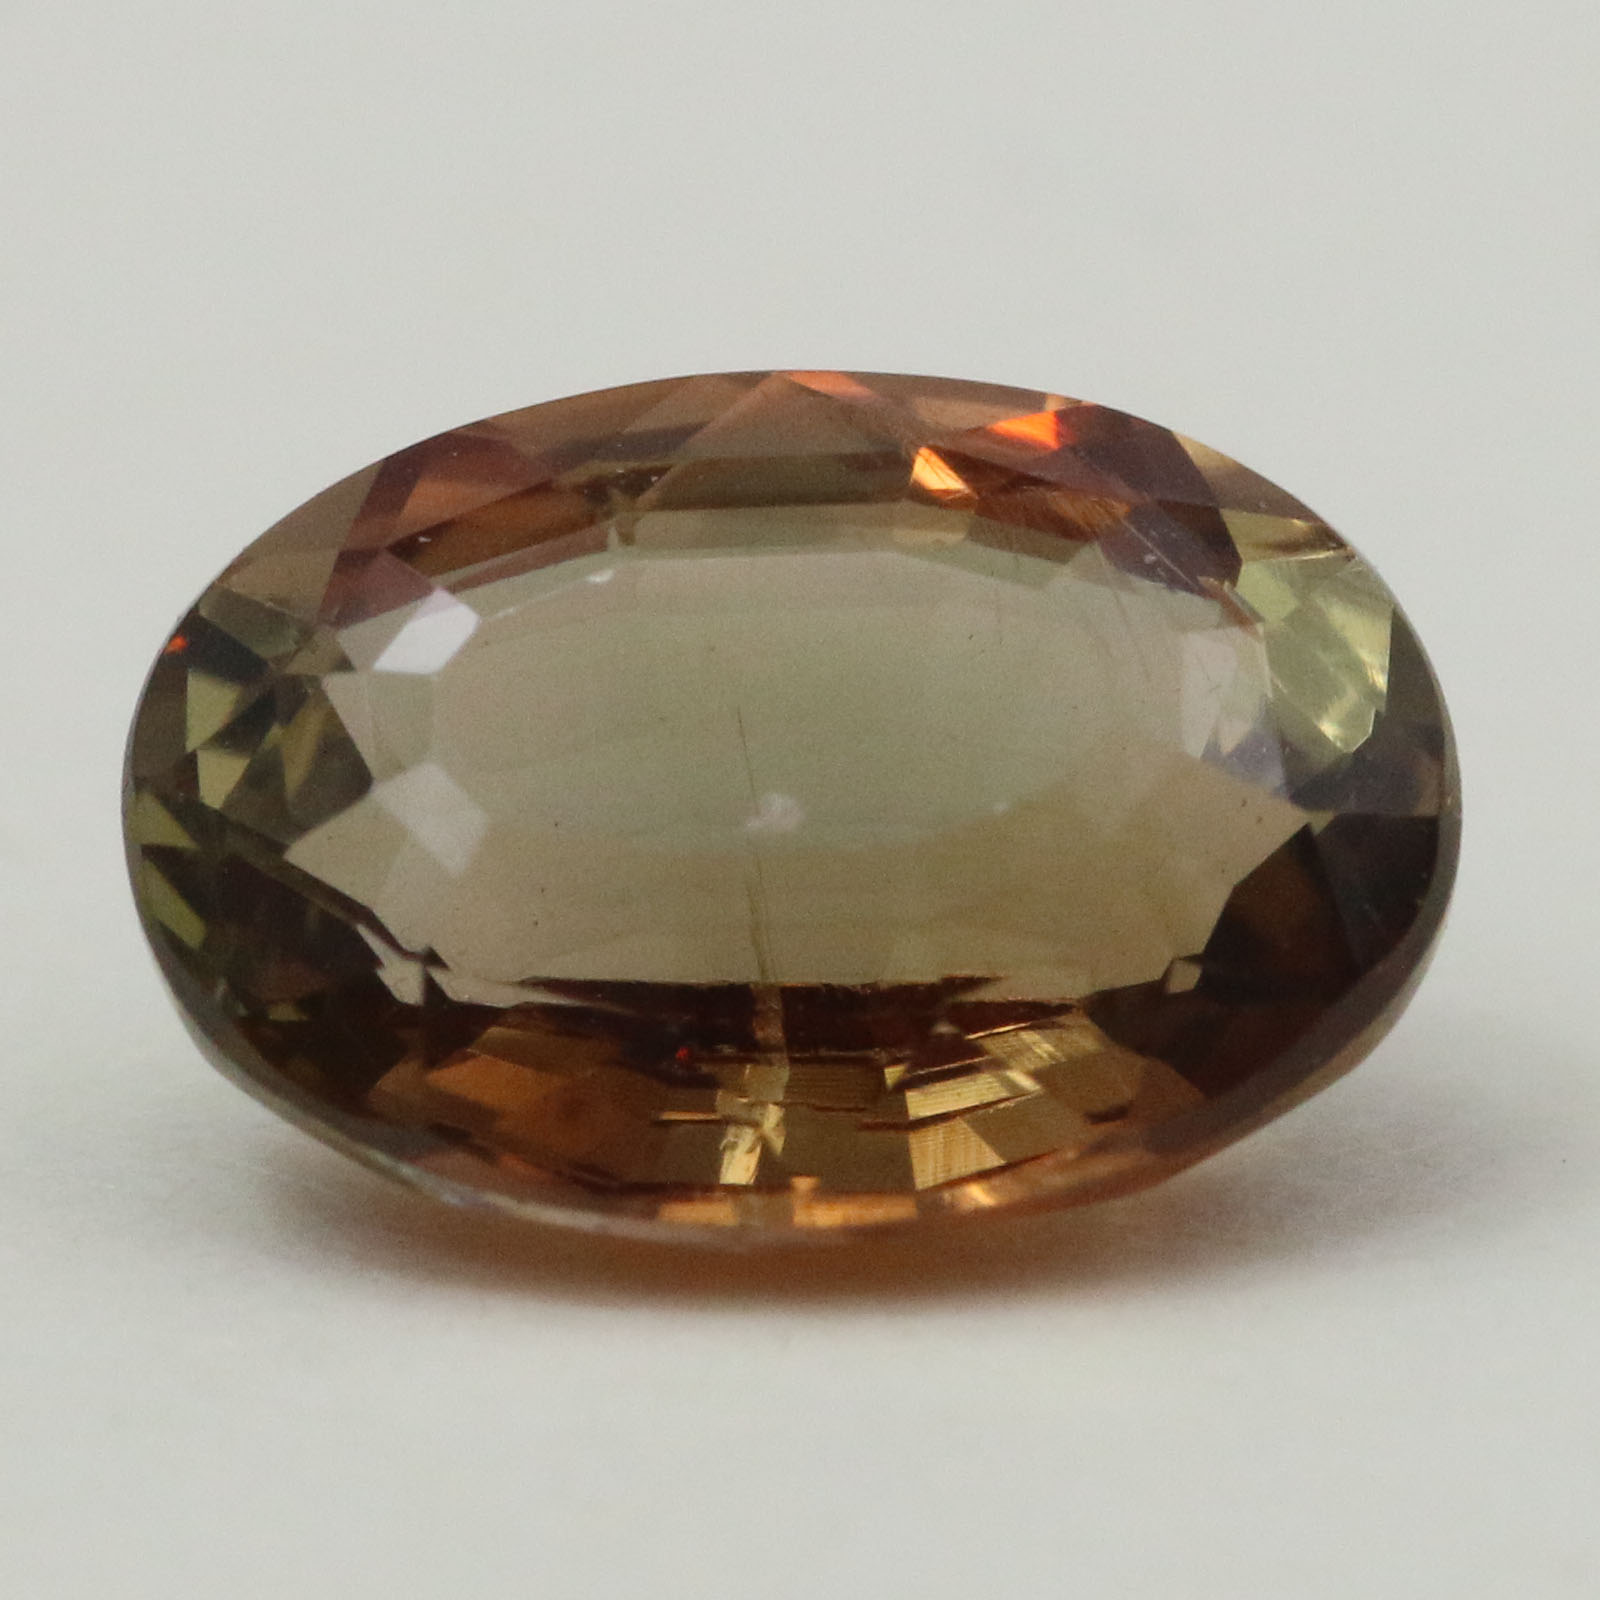 ANDALUSITE 9X6.6 OVAL 1.83CT